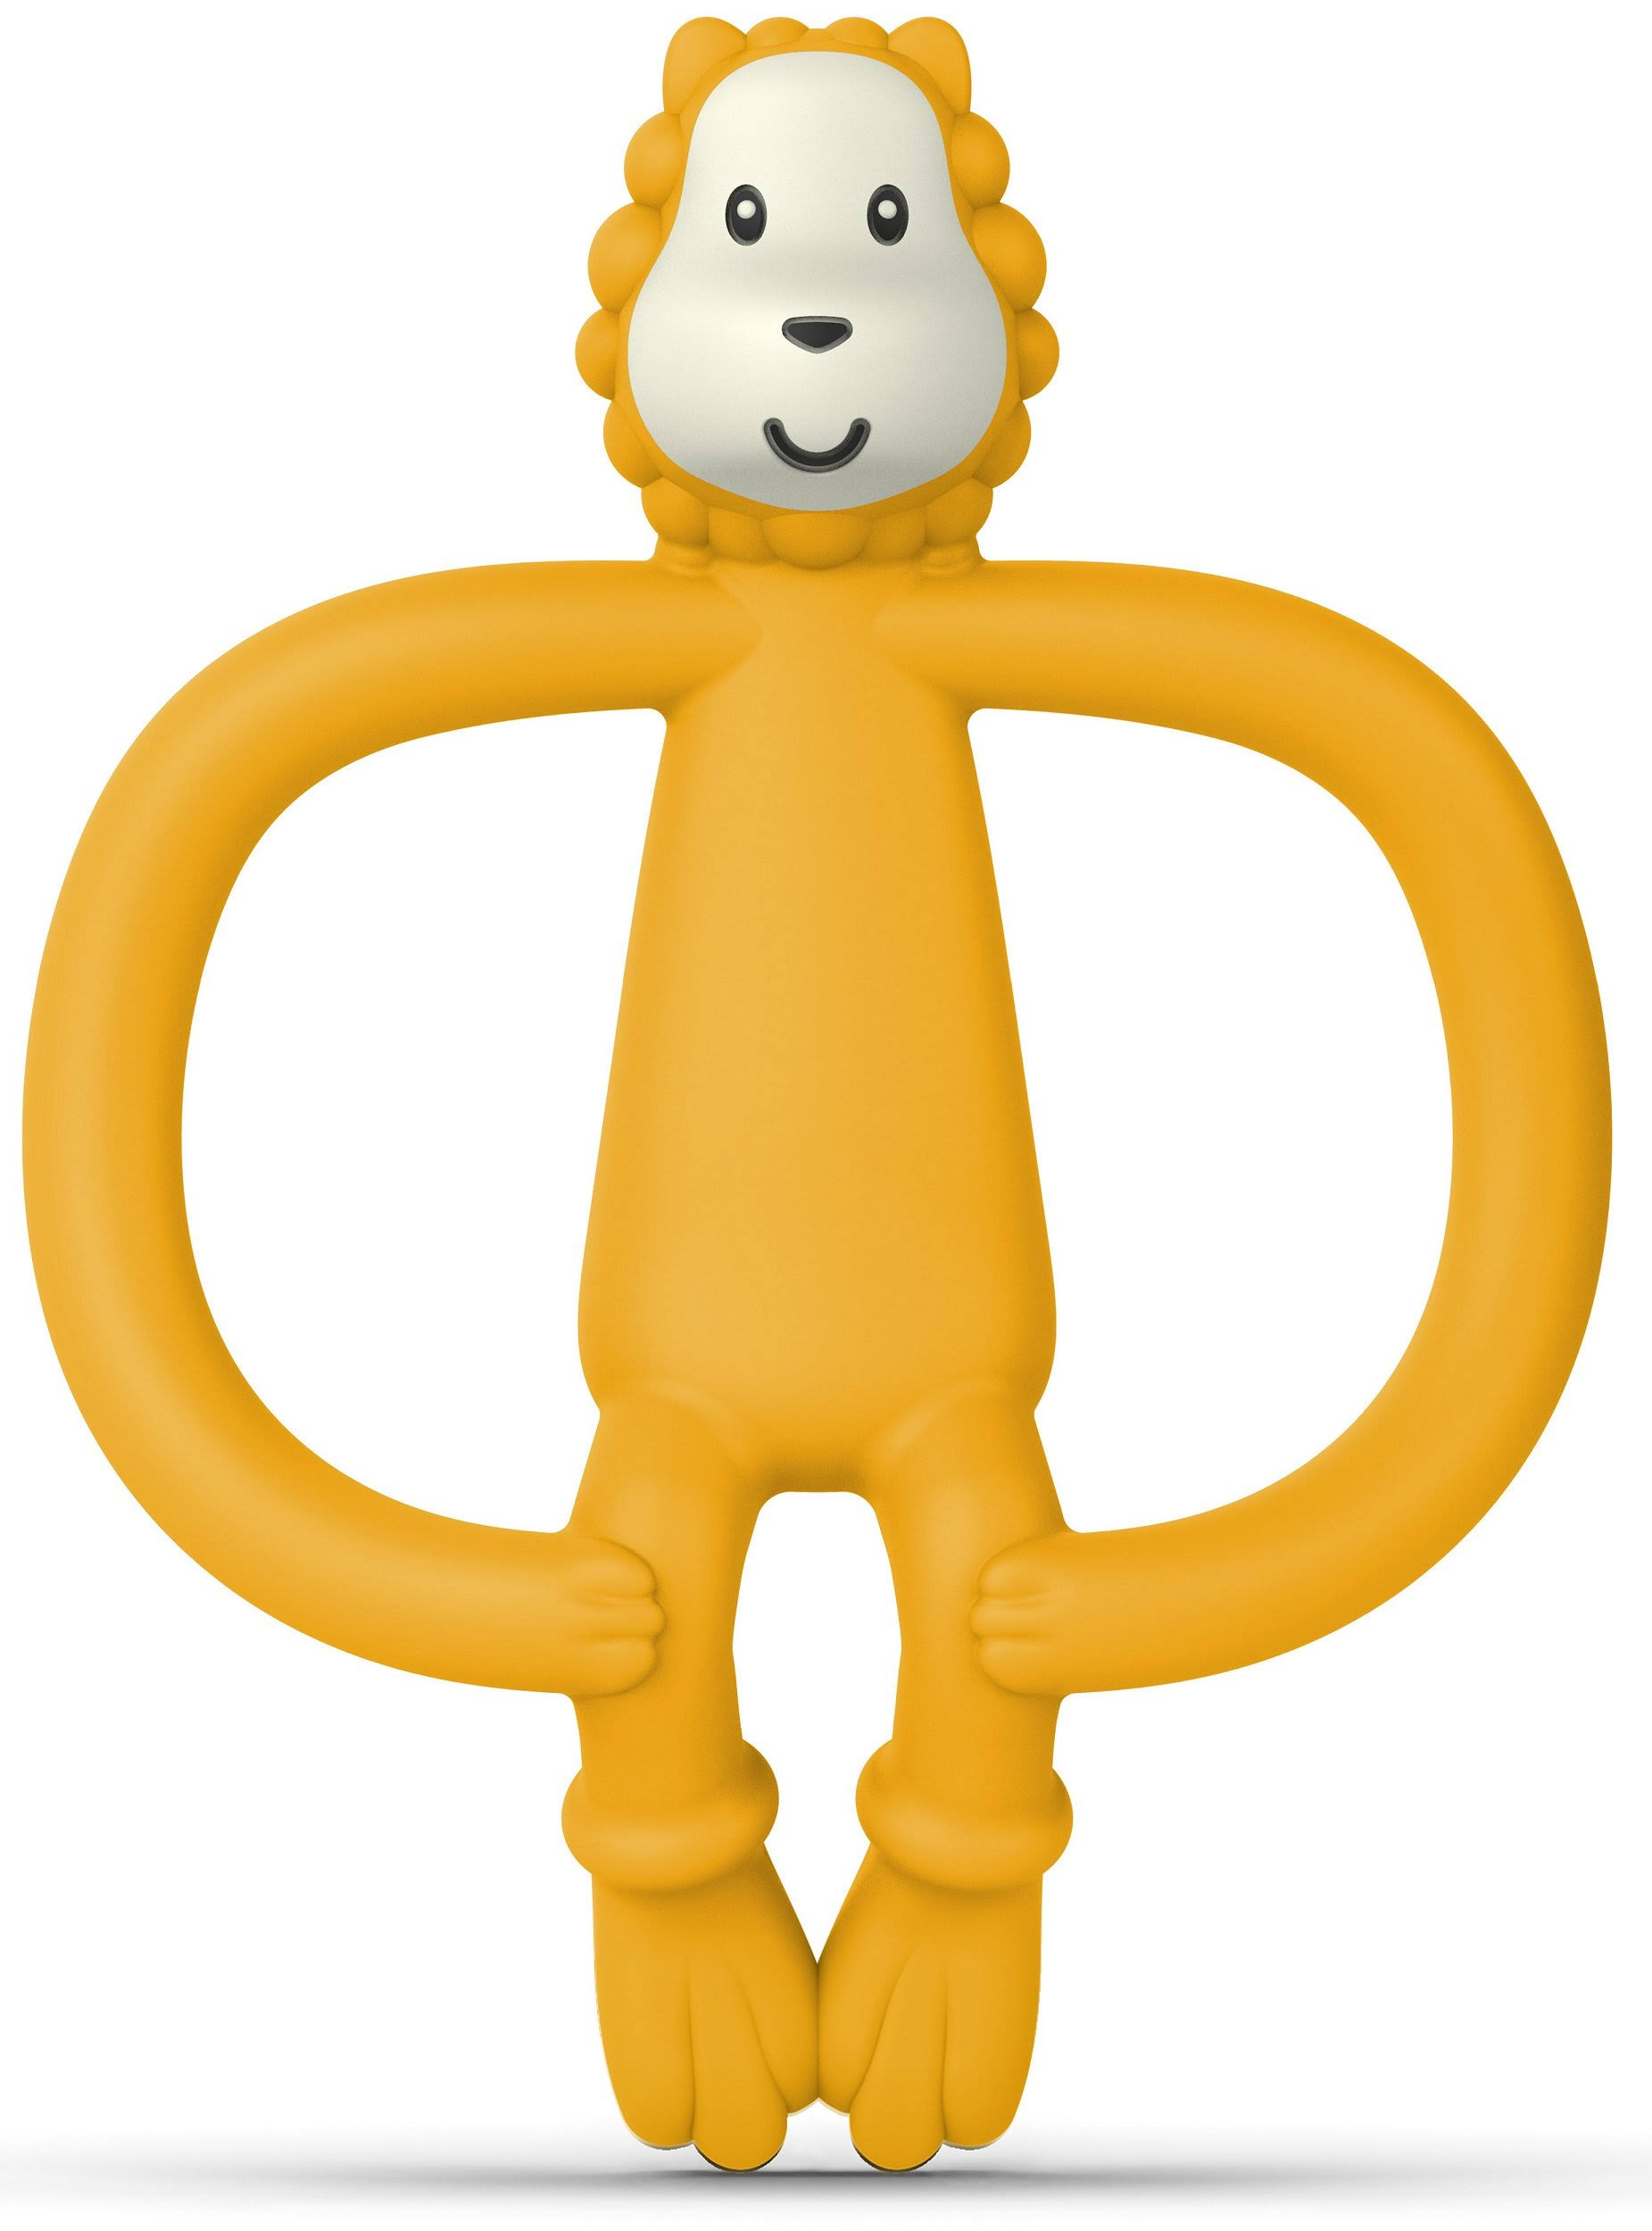 Matchstick Monkey Teether Toy - Ludo Lion